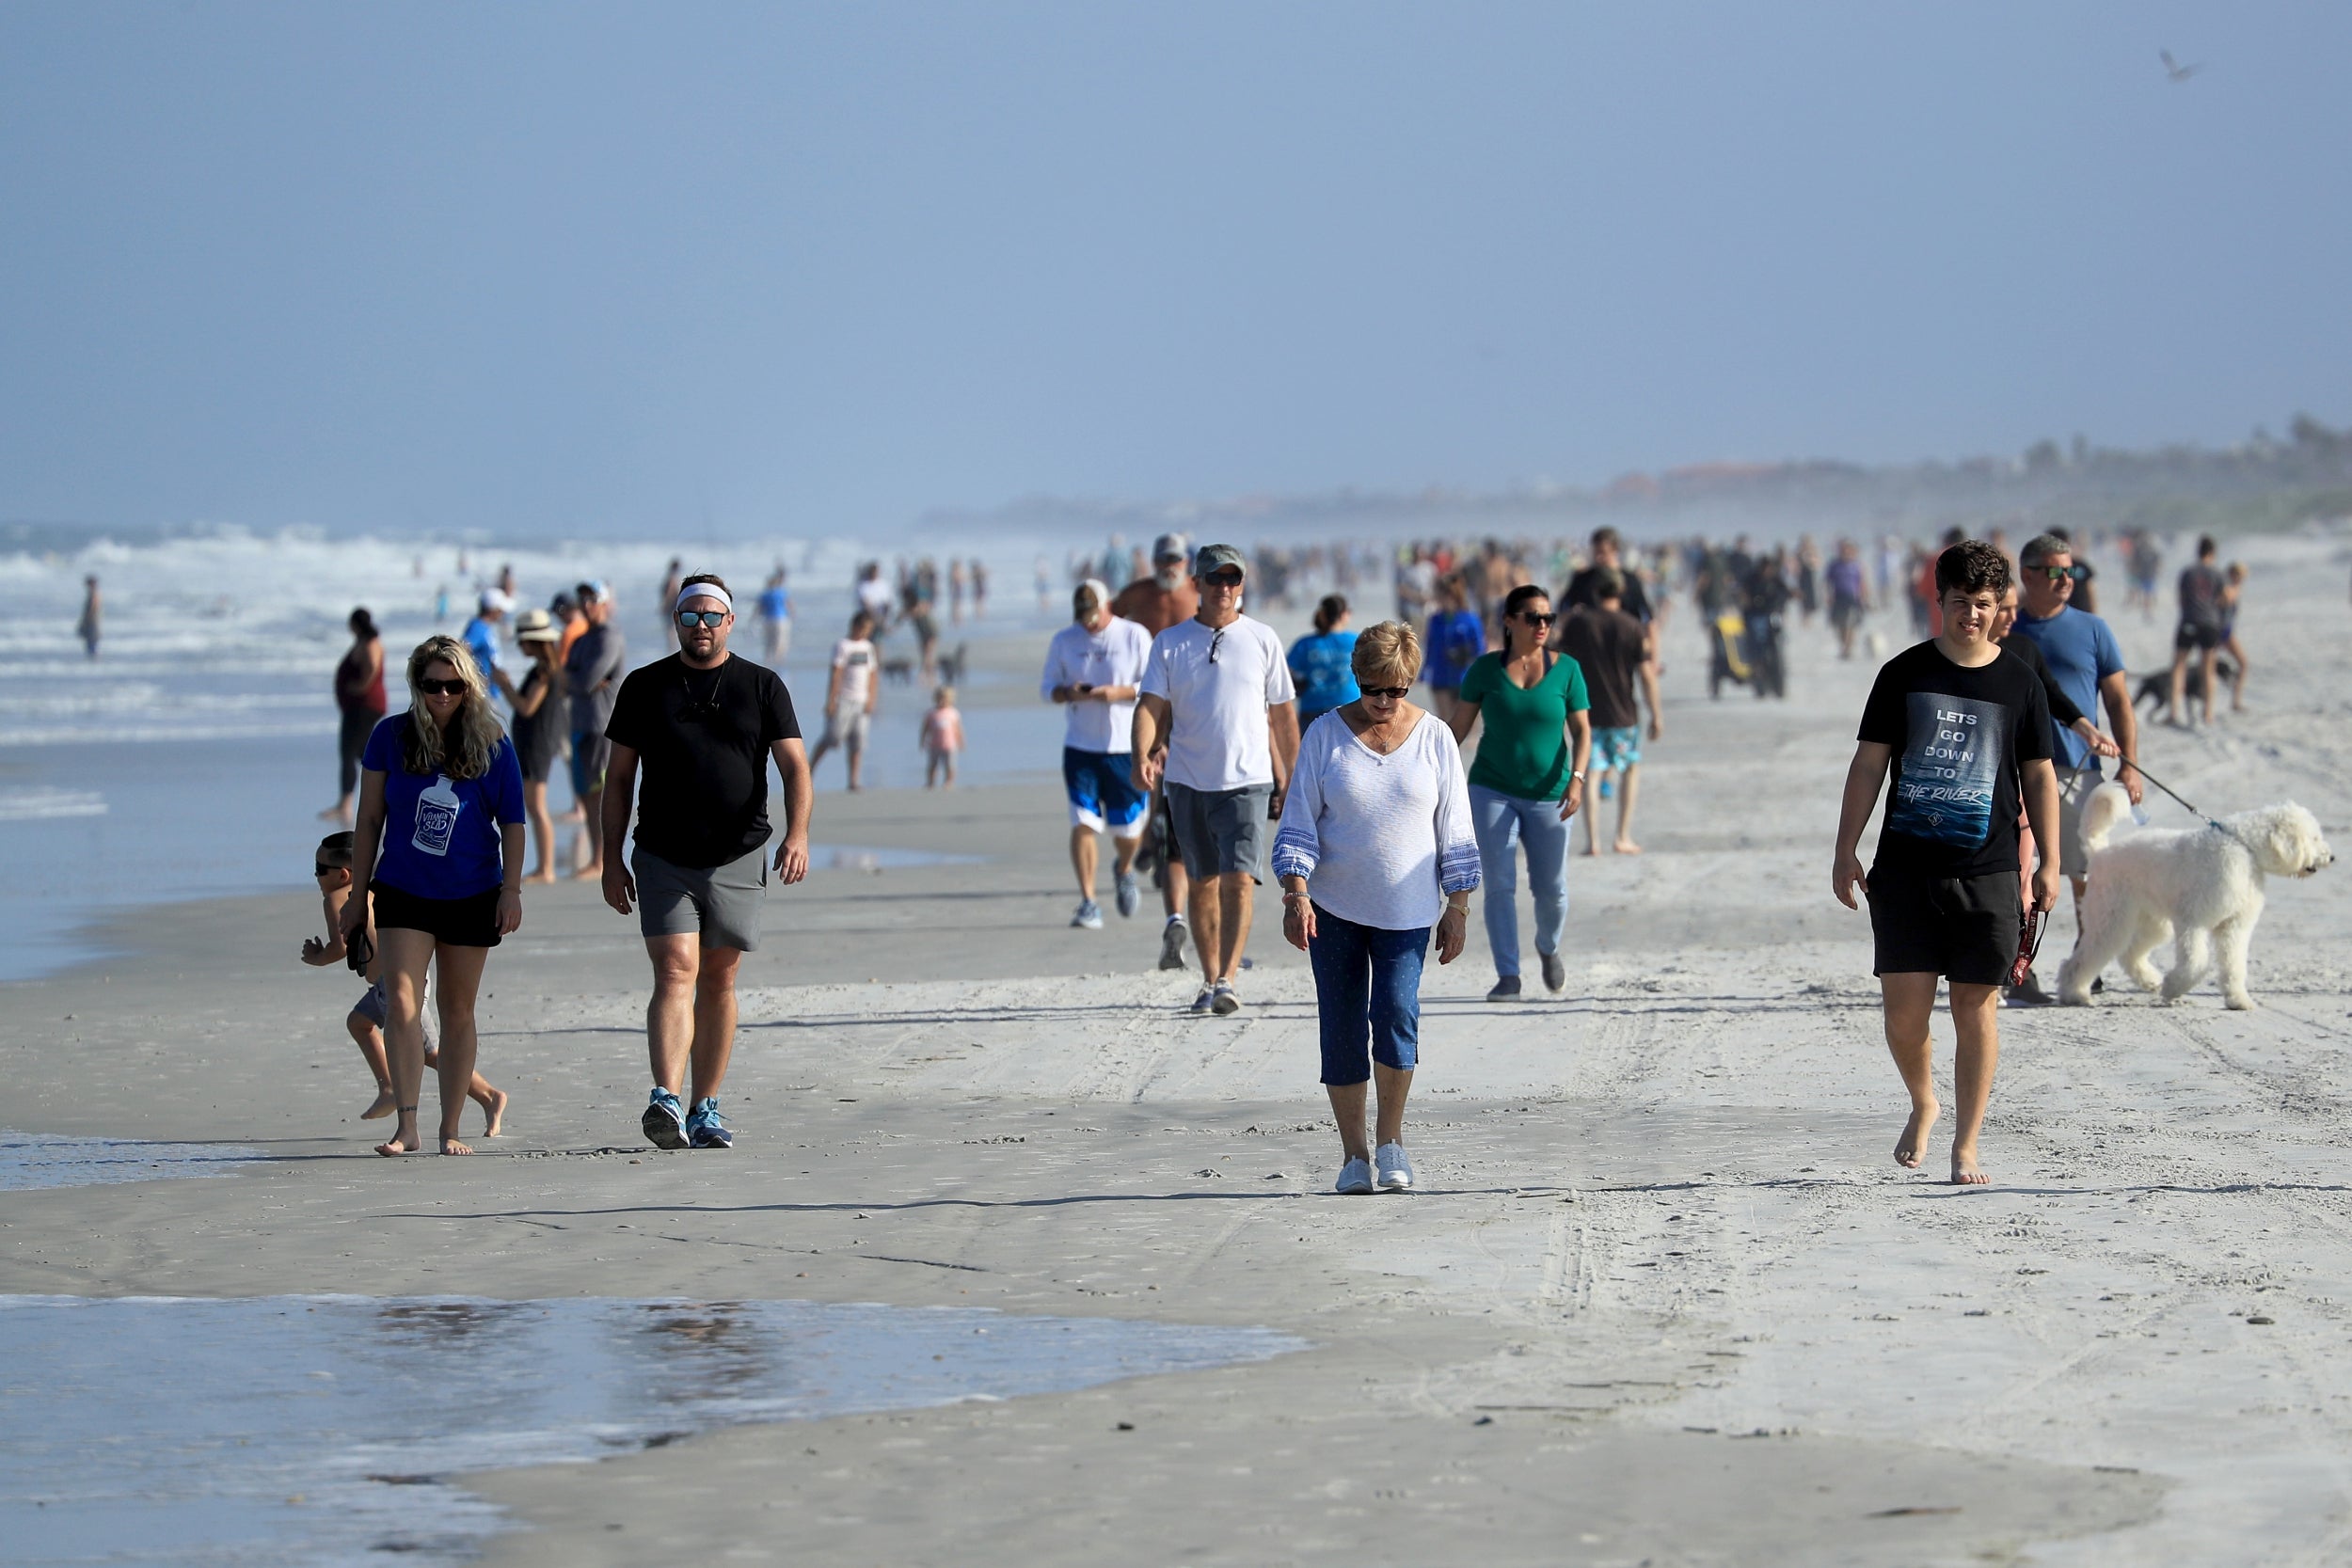 People are seen at the beach on April 17, 2020 in Jacksonville Beach, Florida. Jacksonville Mayor Lenny Curry announced Thursday that Duval County’s beaches would open at 5 p.m. but only for restricted hours and can only be used for swimming, running, surfing, walking, biking, fishing, and taking care of pets.